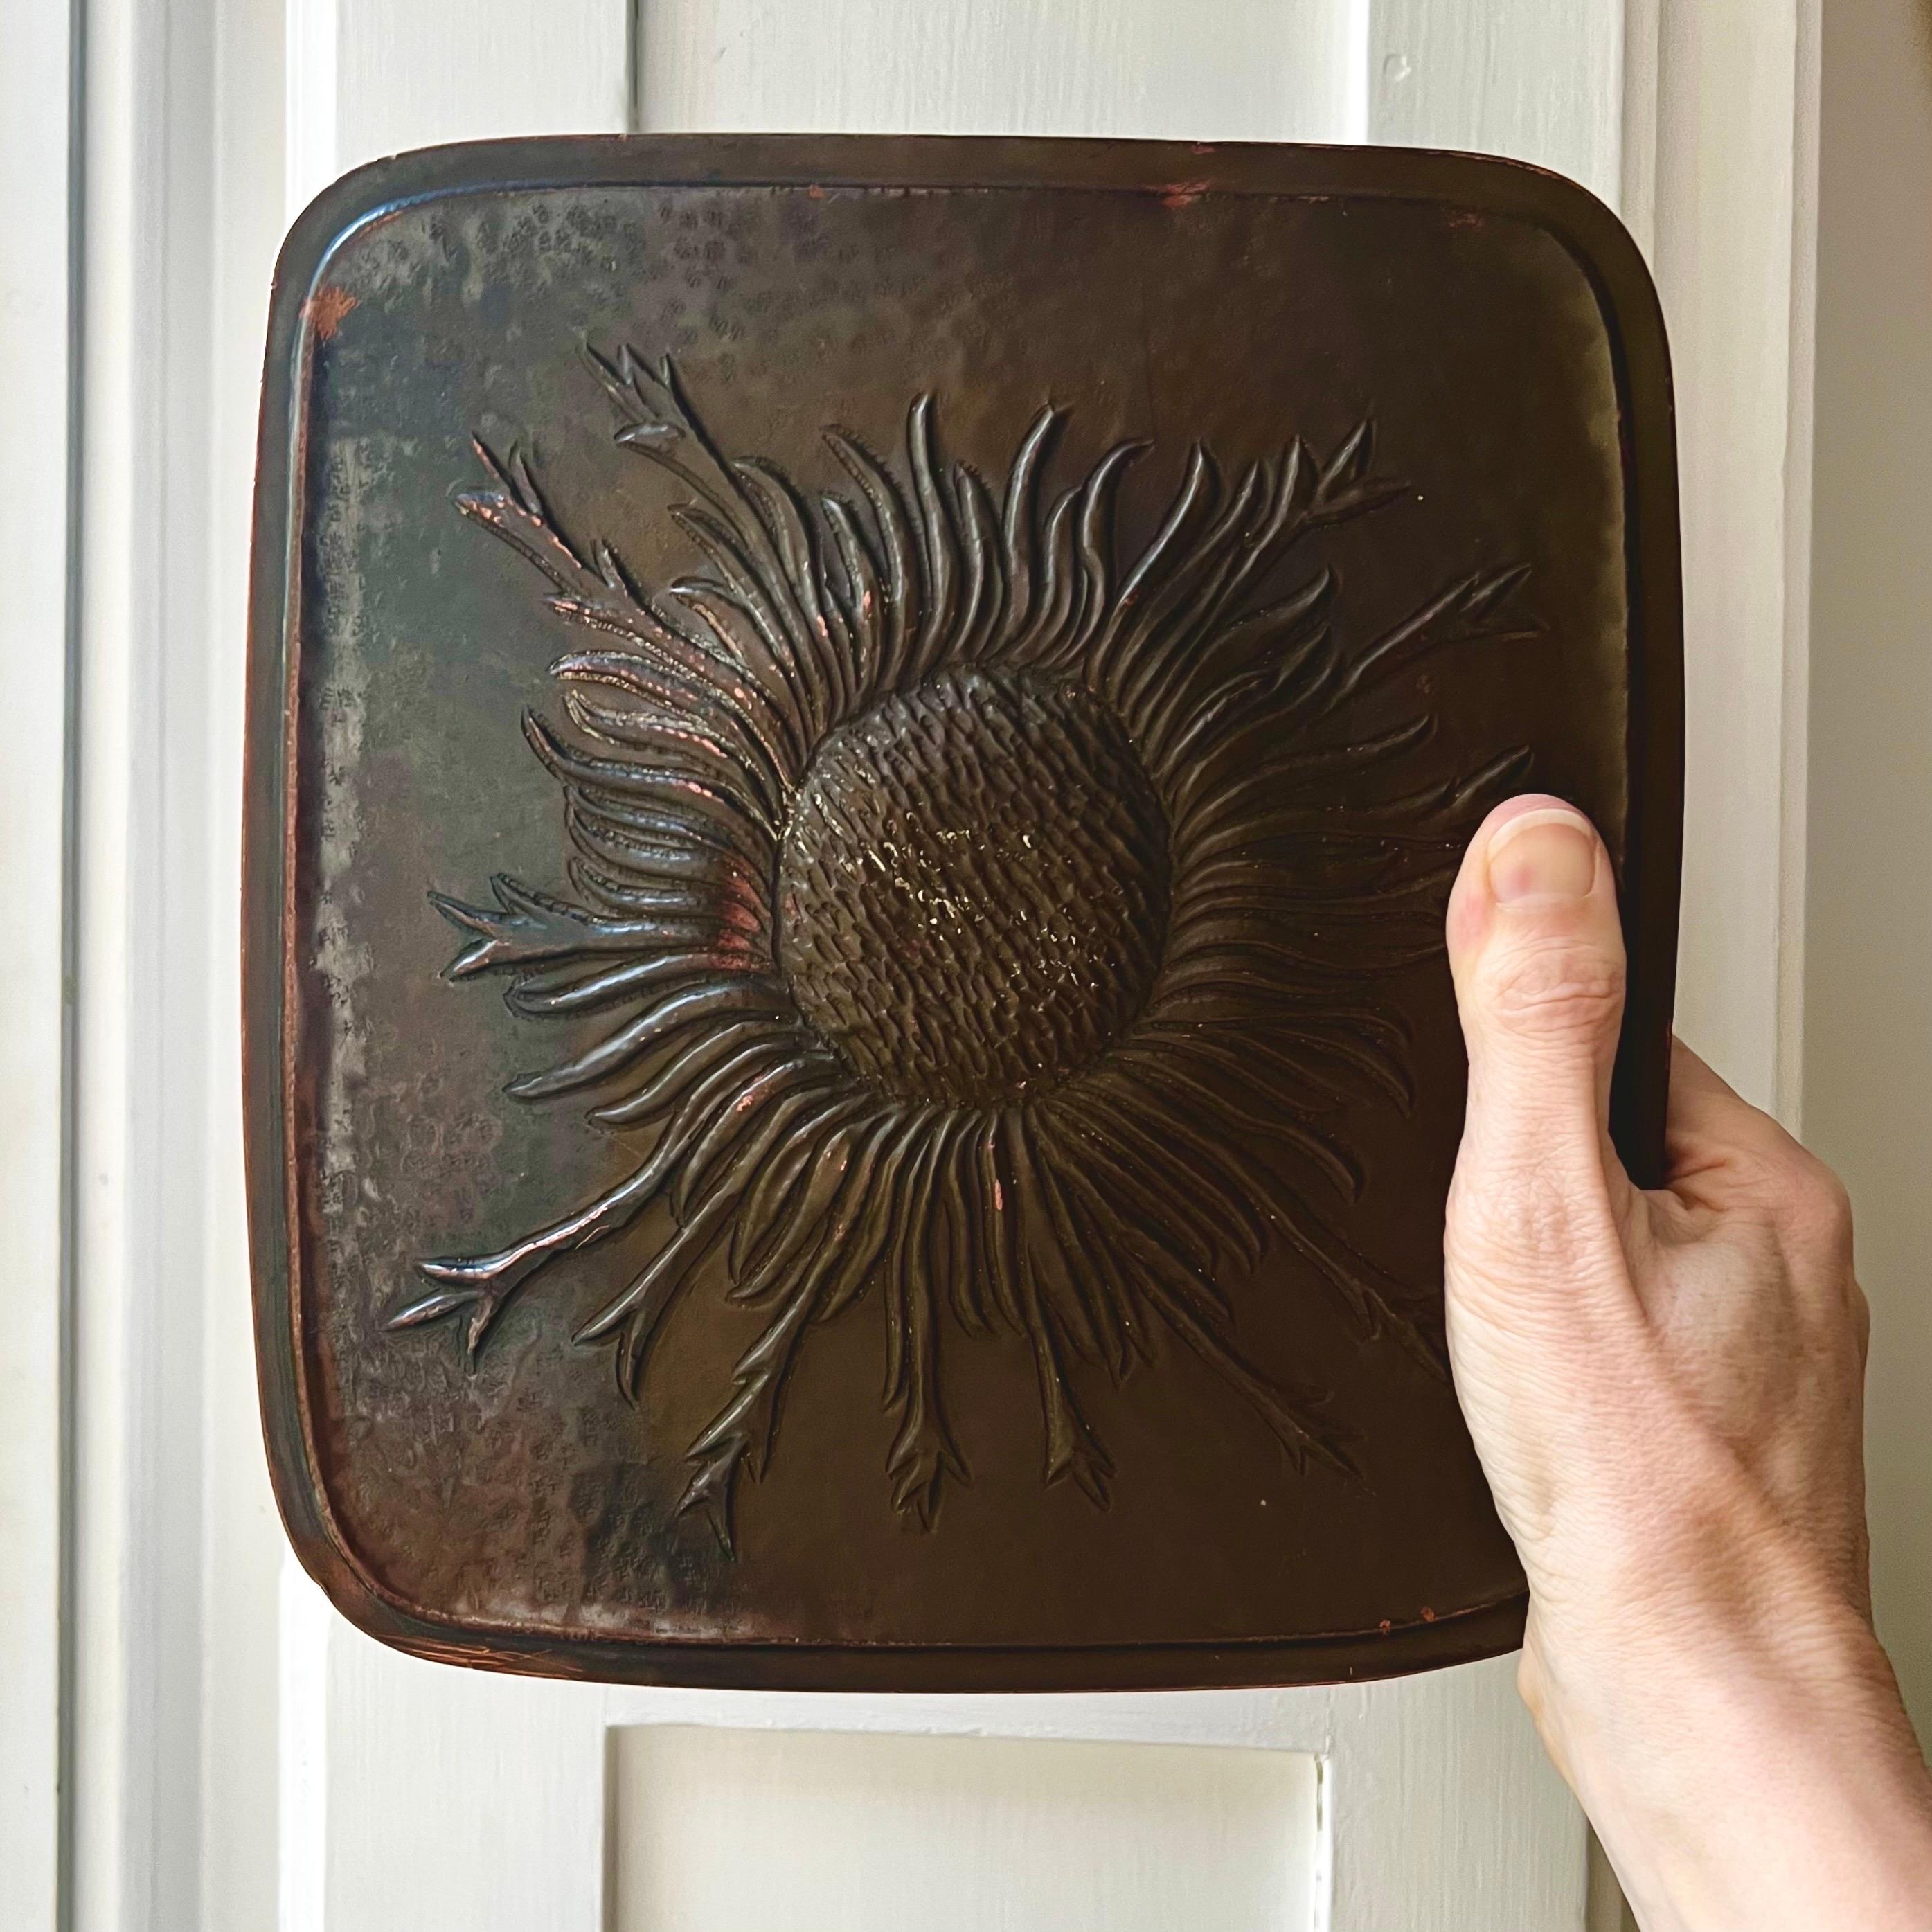 A large push-pull door handle with raised sunflower design, made of patinated and hammered copper repoussé, probably over wood. Found in Germany, mid-20th century.

An unusual piece, which looks to be hand-crafted, in good vintage condition. Nicely